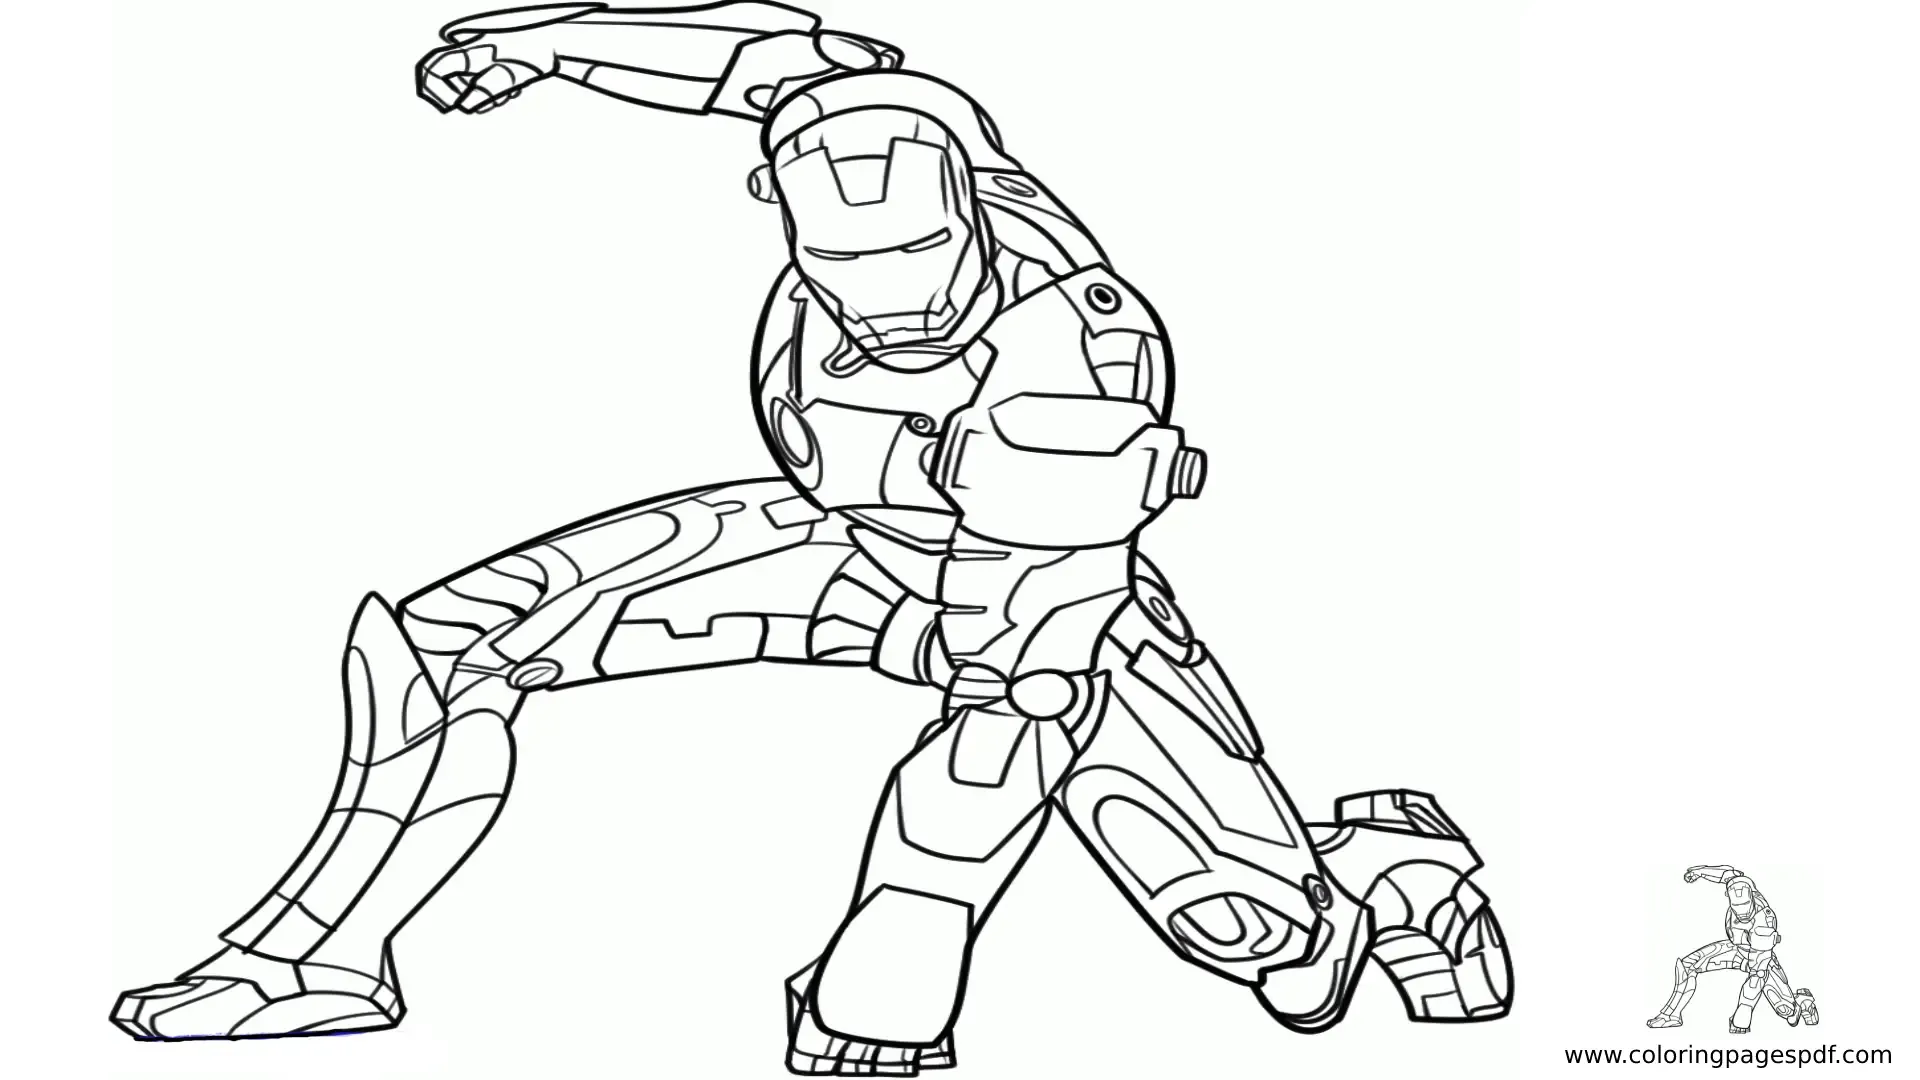 Coloring Pages Of Iron Man In A Cool Pose